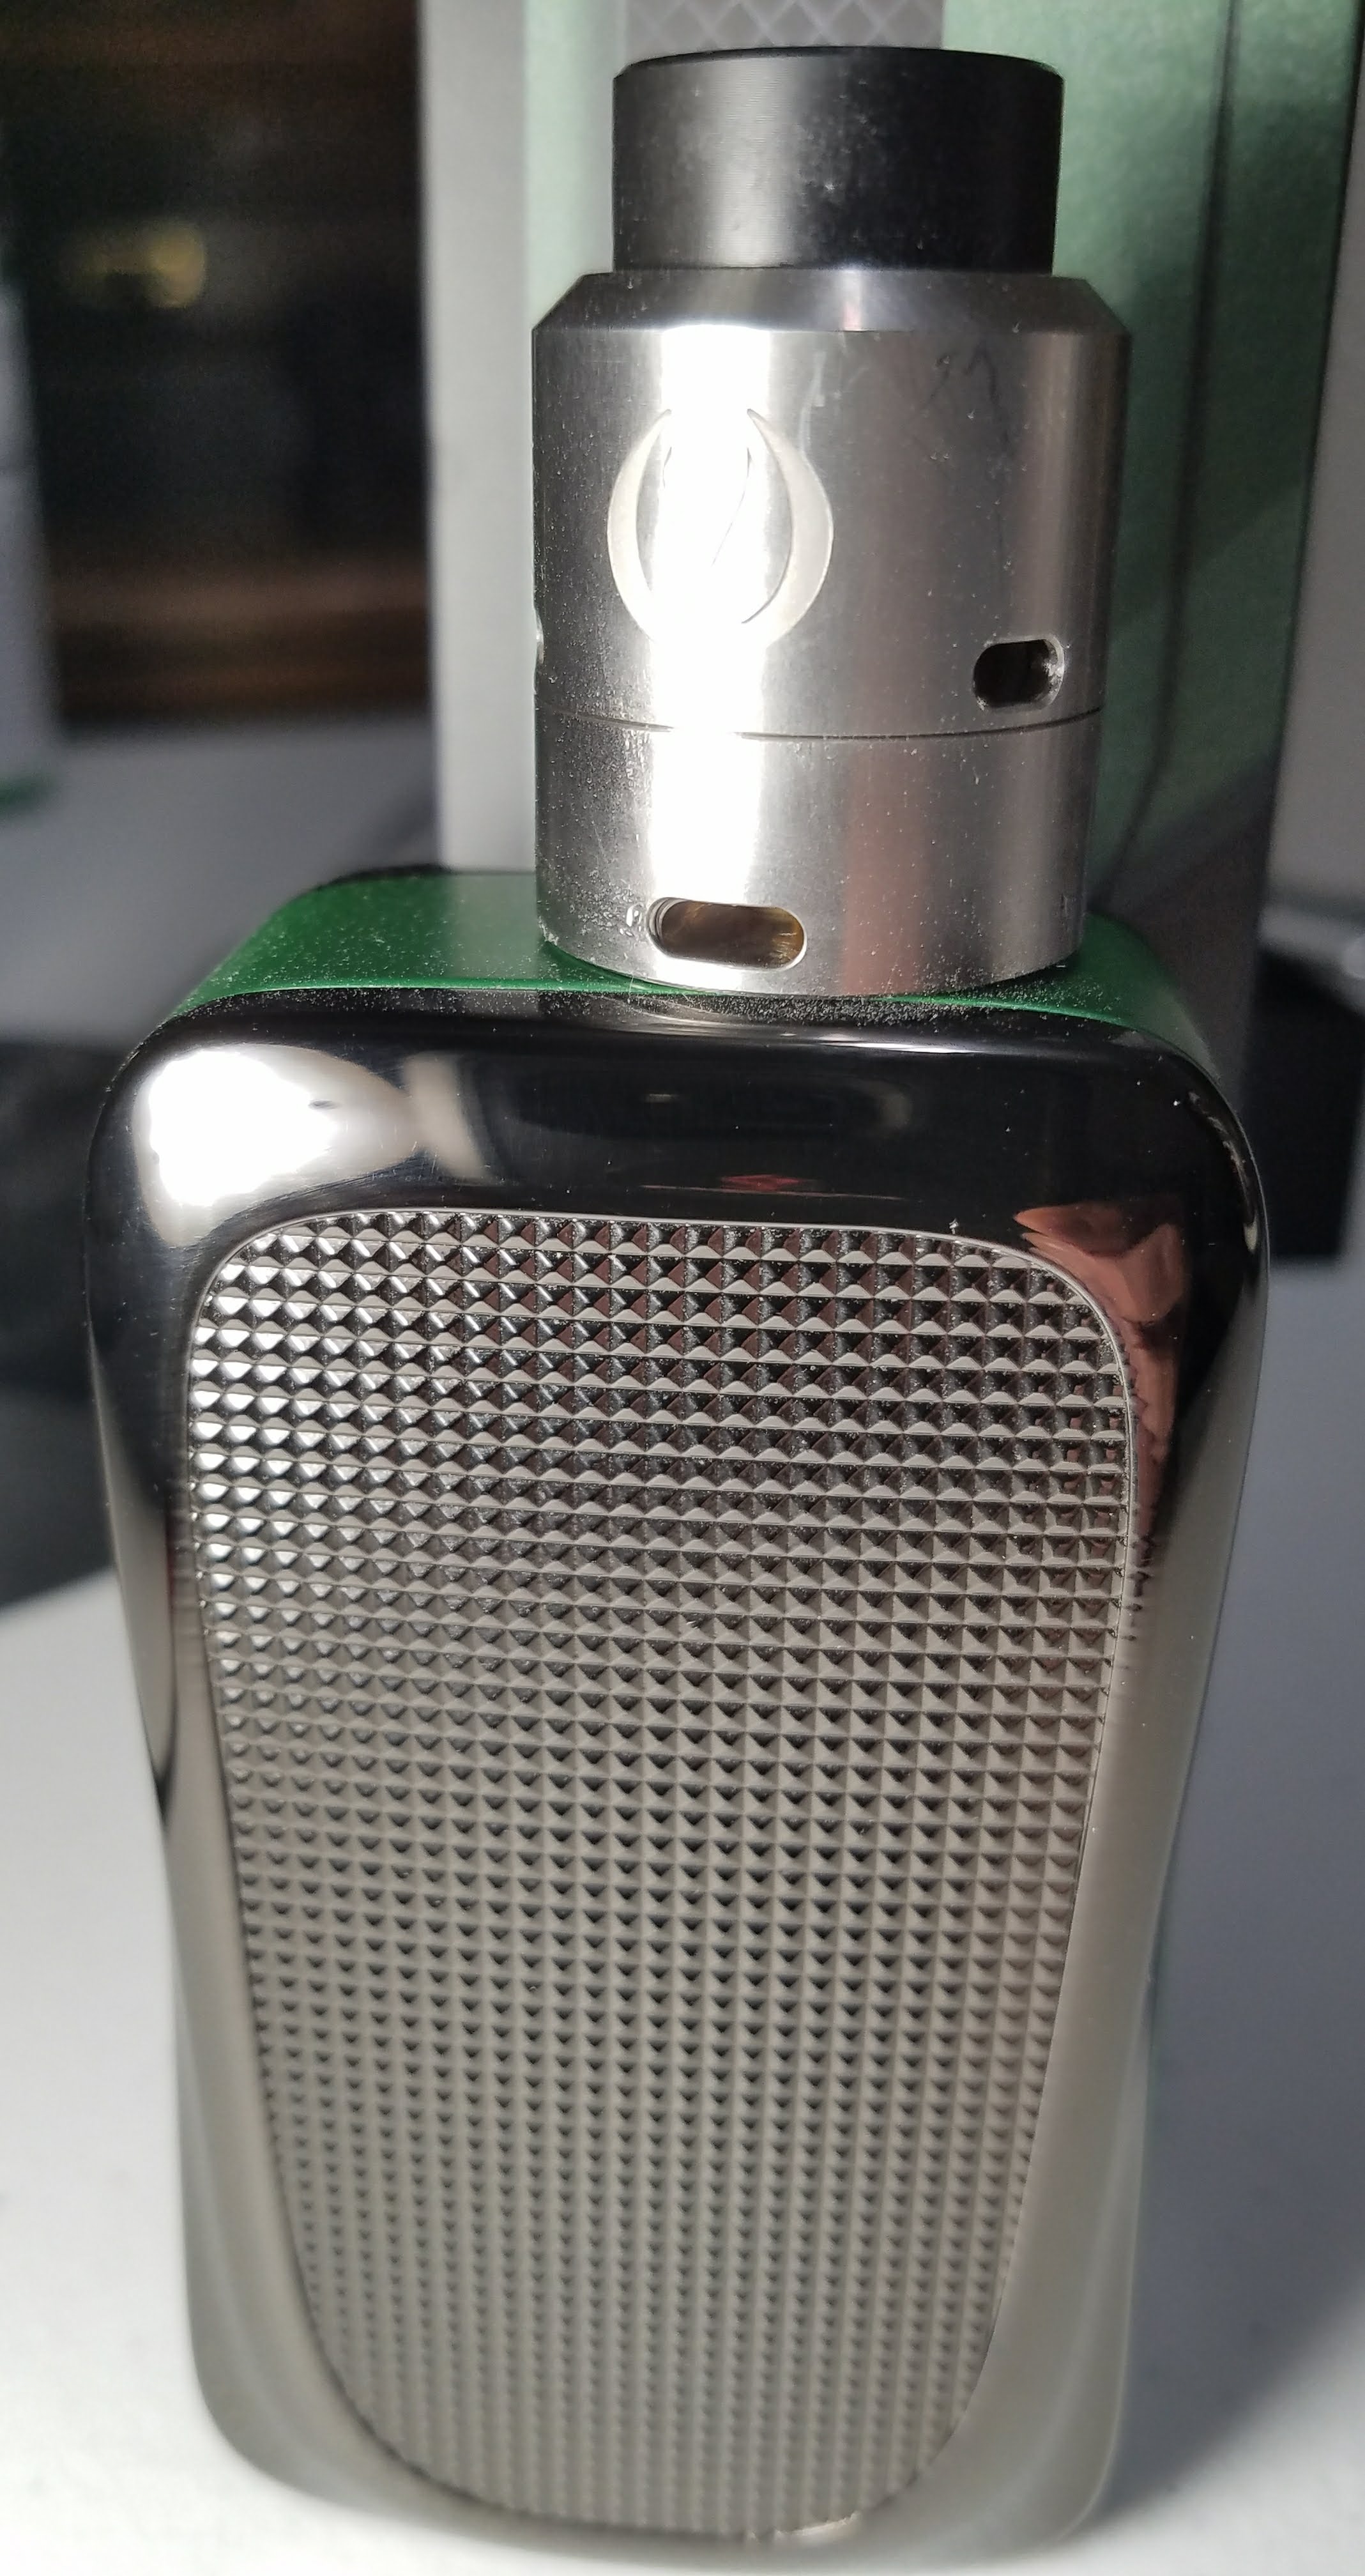 Rev-Tech GTS 230w Review | Vaping Underground Forums - An Ecig and ...